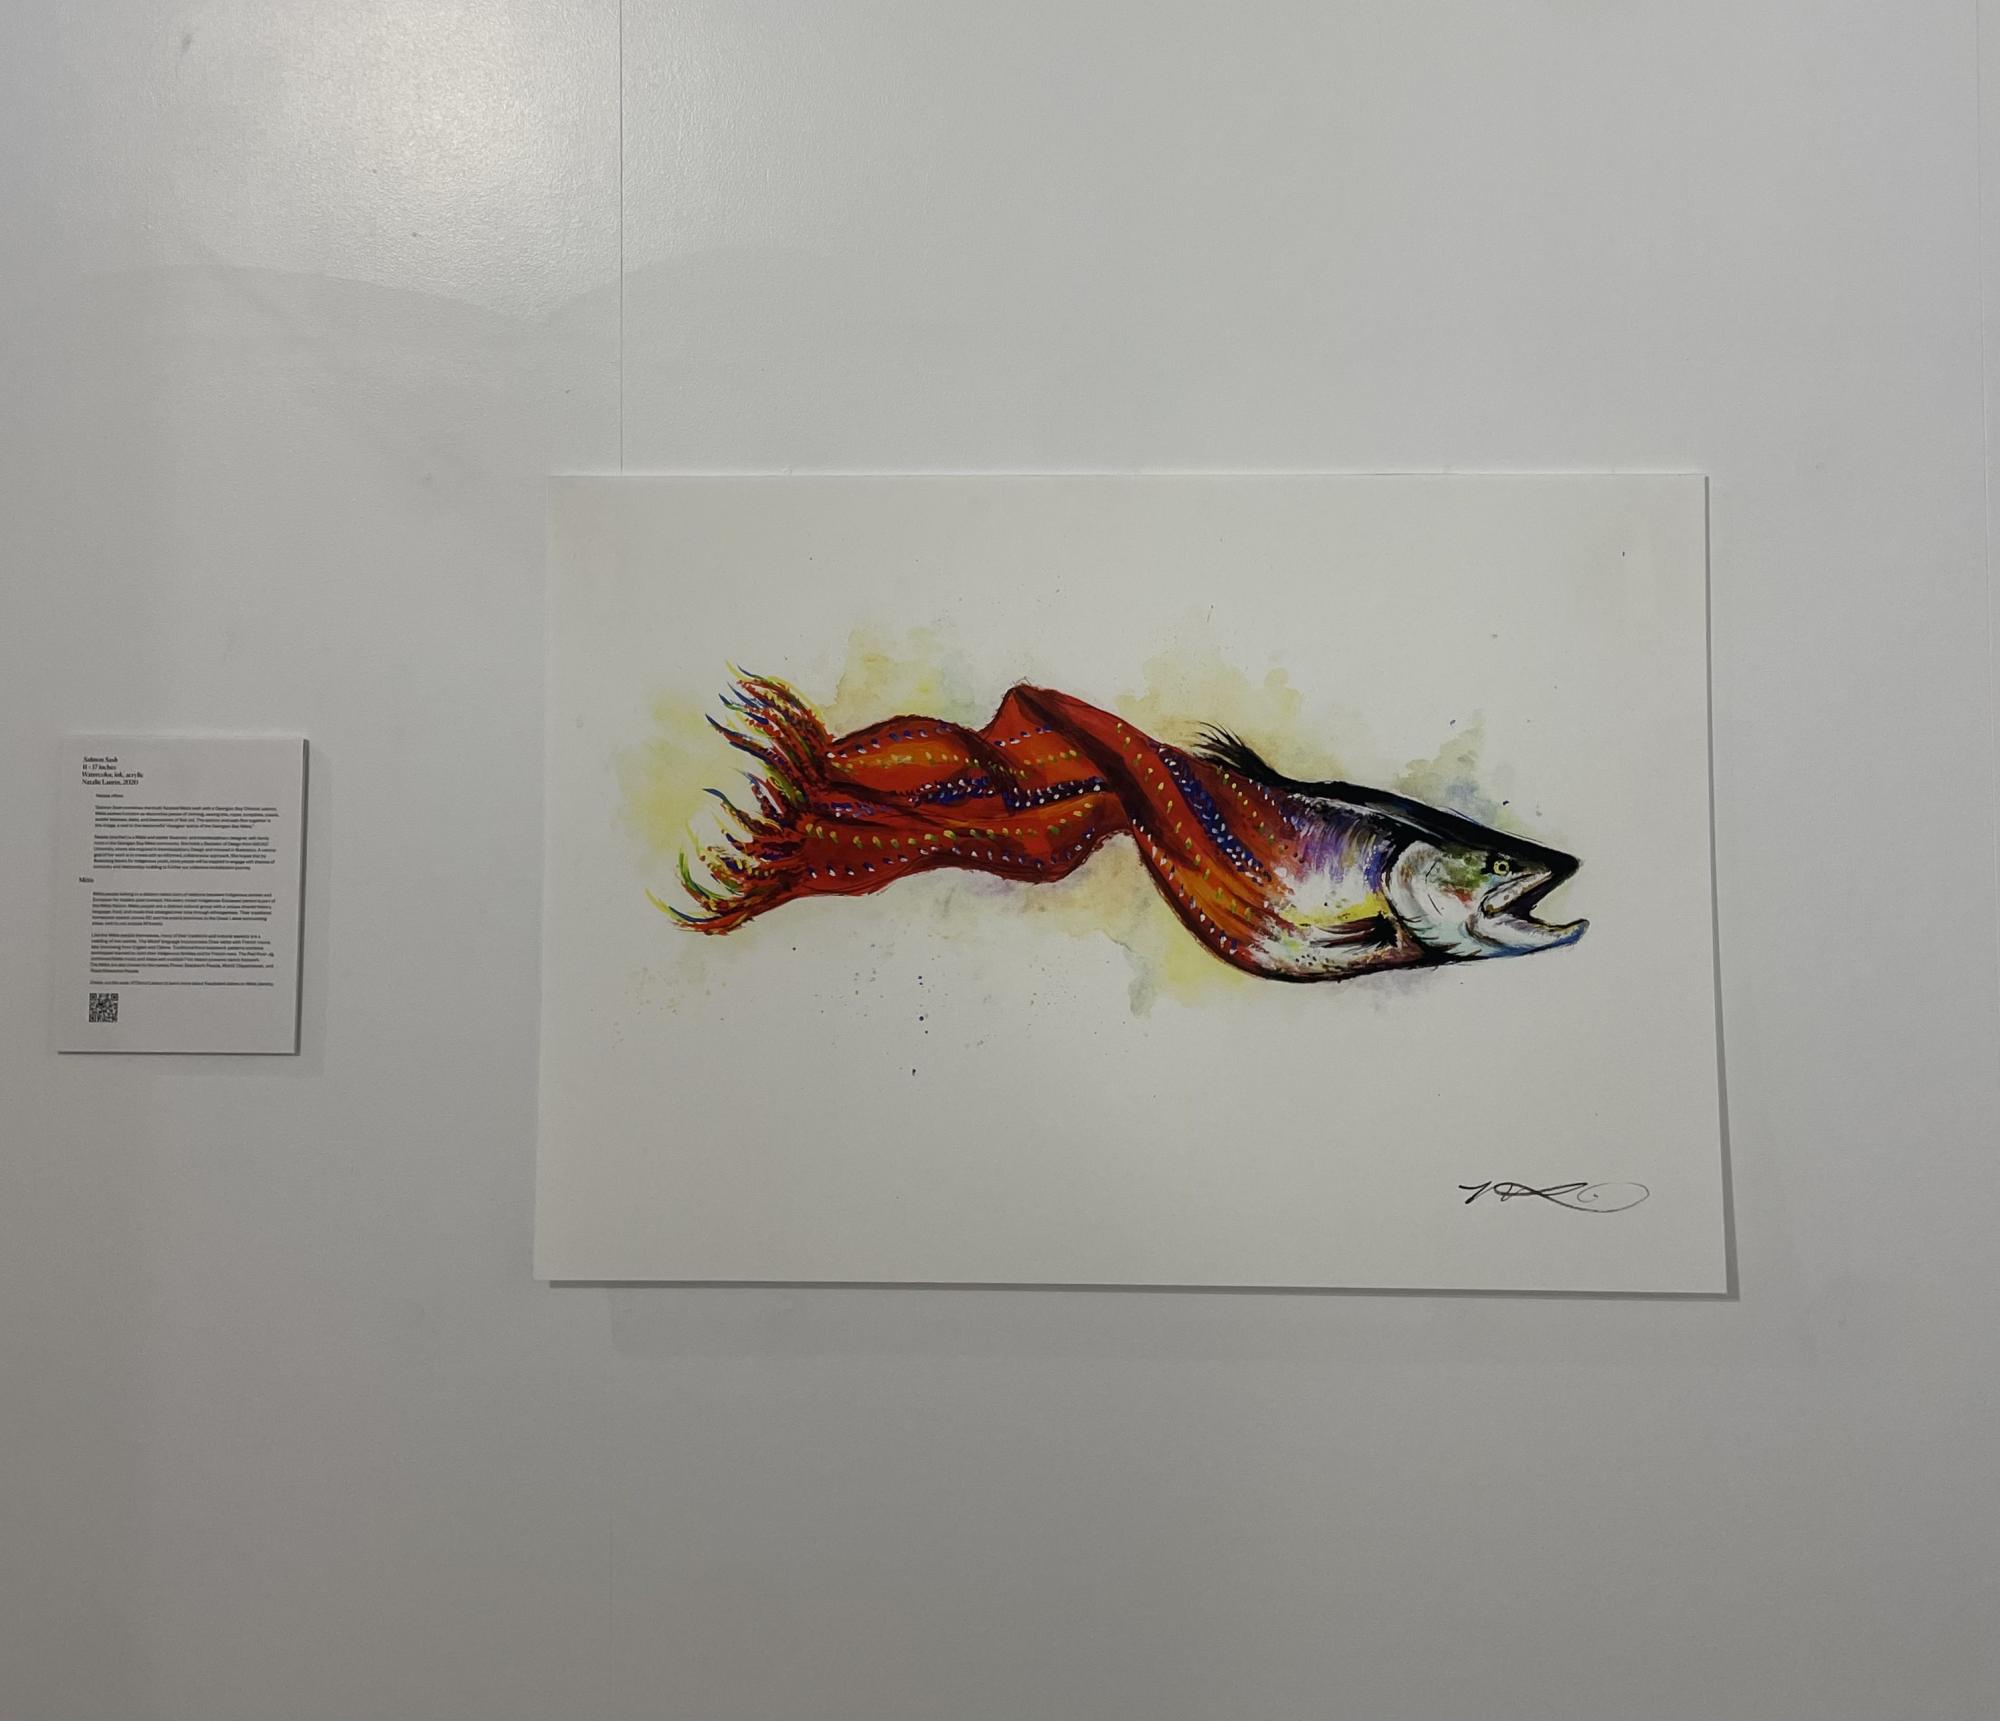 [ID: "Watercolour, ink, and acrylic illustration of a Georgian Bay chinook salmon swimming off to the right with its mouth open. Its tail morphs into a red Métis sash halfway down its body."]